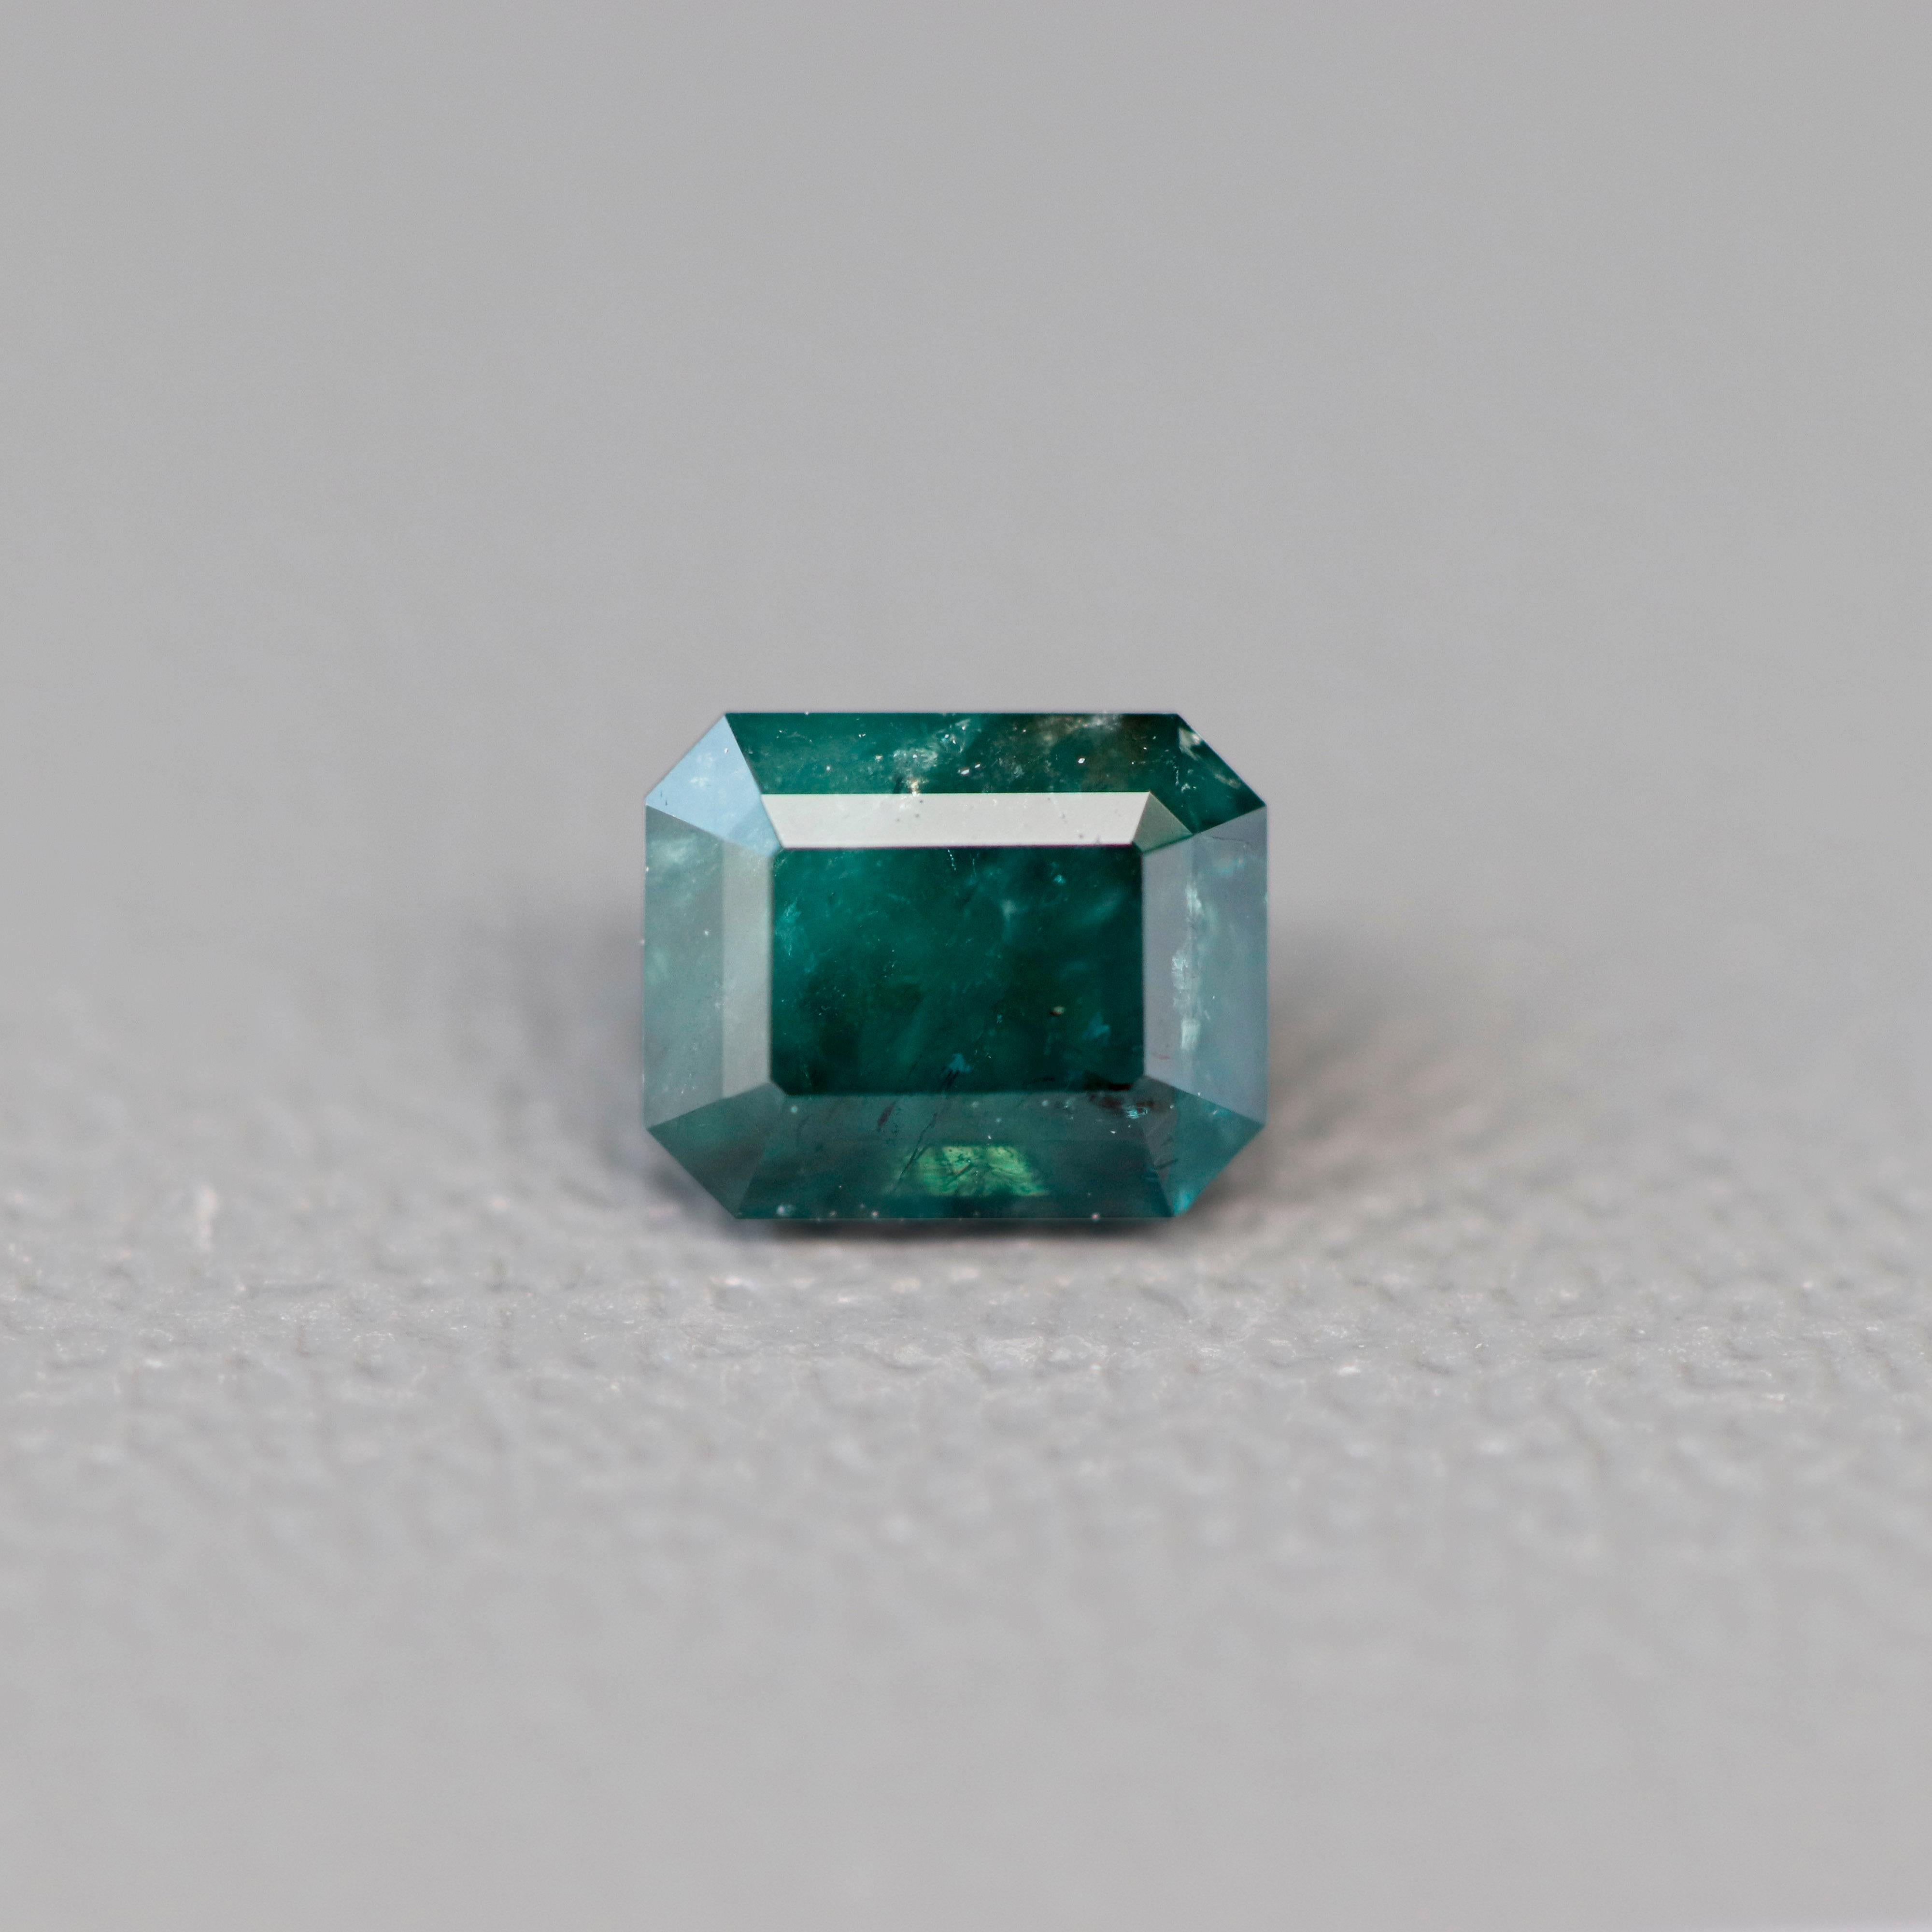 Introducing a captivating piece of nature's marvel, this exquisite listing showcases a mesmerizing 0.53 ct weight natural Russian Alexandrite. 

The natural Russian Alexandrite is renowned for its remarkable color-changing properties, shifting from